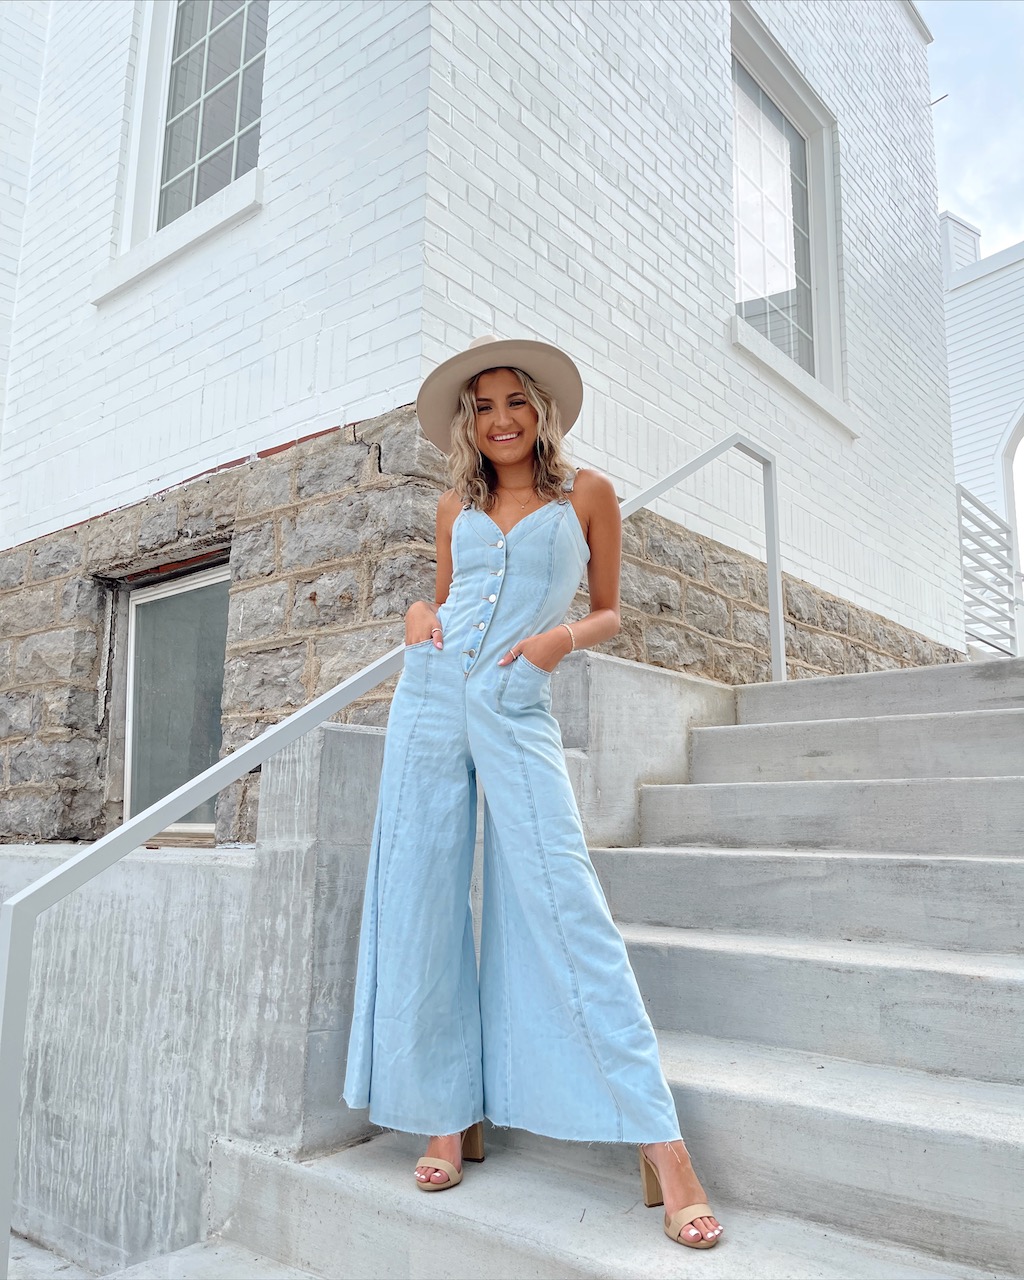 12 Outfit Ideas For Nashville Summer 2021 – Styled by McKenz